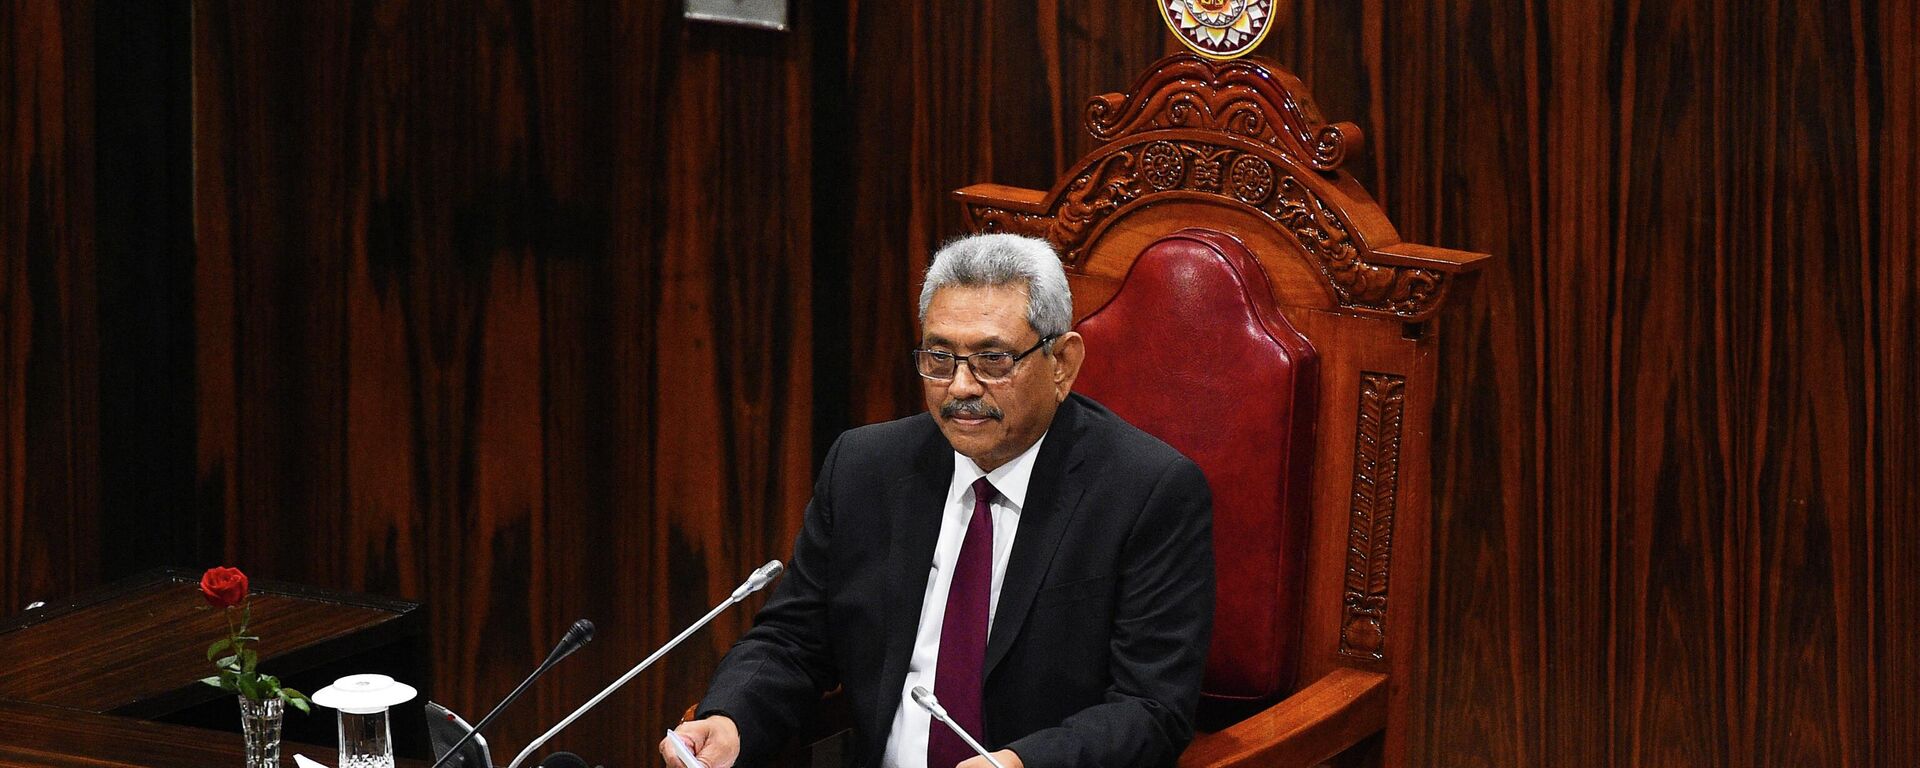 (FILES) In this file photo taken on January 3, 2020, Sri Lanka's new President Gotabaya Rajapaksa makes his first policy address at the national parliament after his landslide electoral victory, in Colombo - Sputnik International, 1920, 27.07.2022